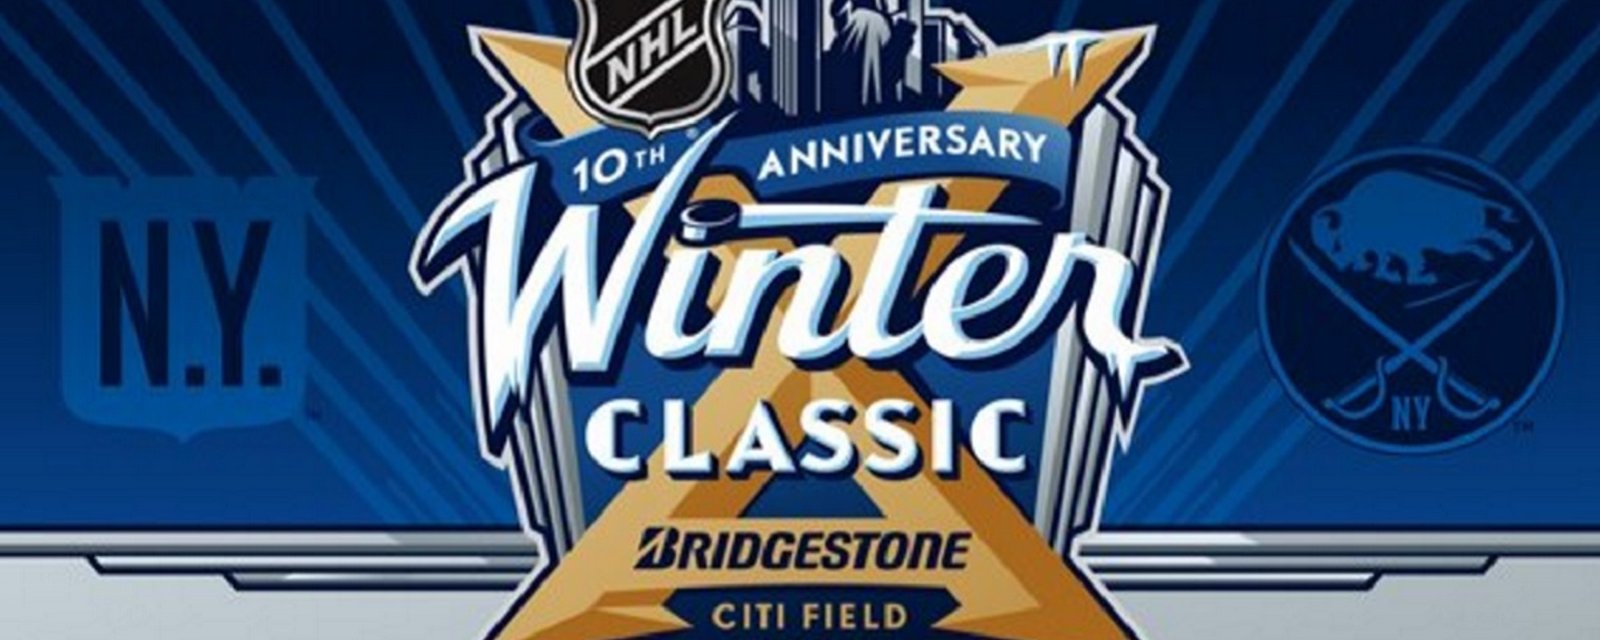 New logos for Sabres/Rangers Winter Classic revealed, and they are awful.